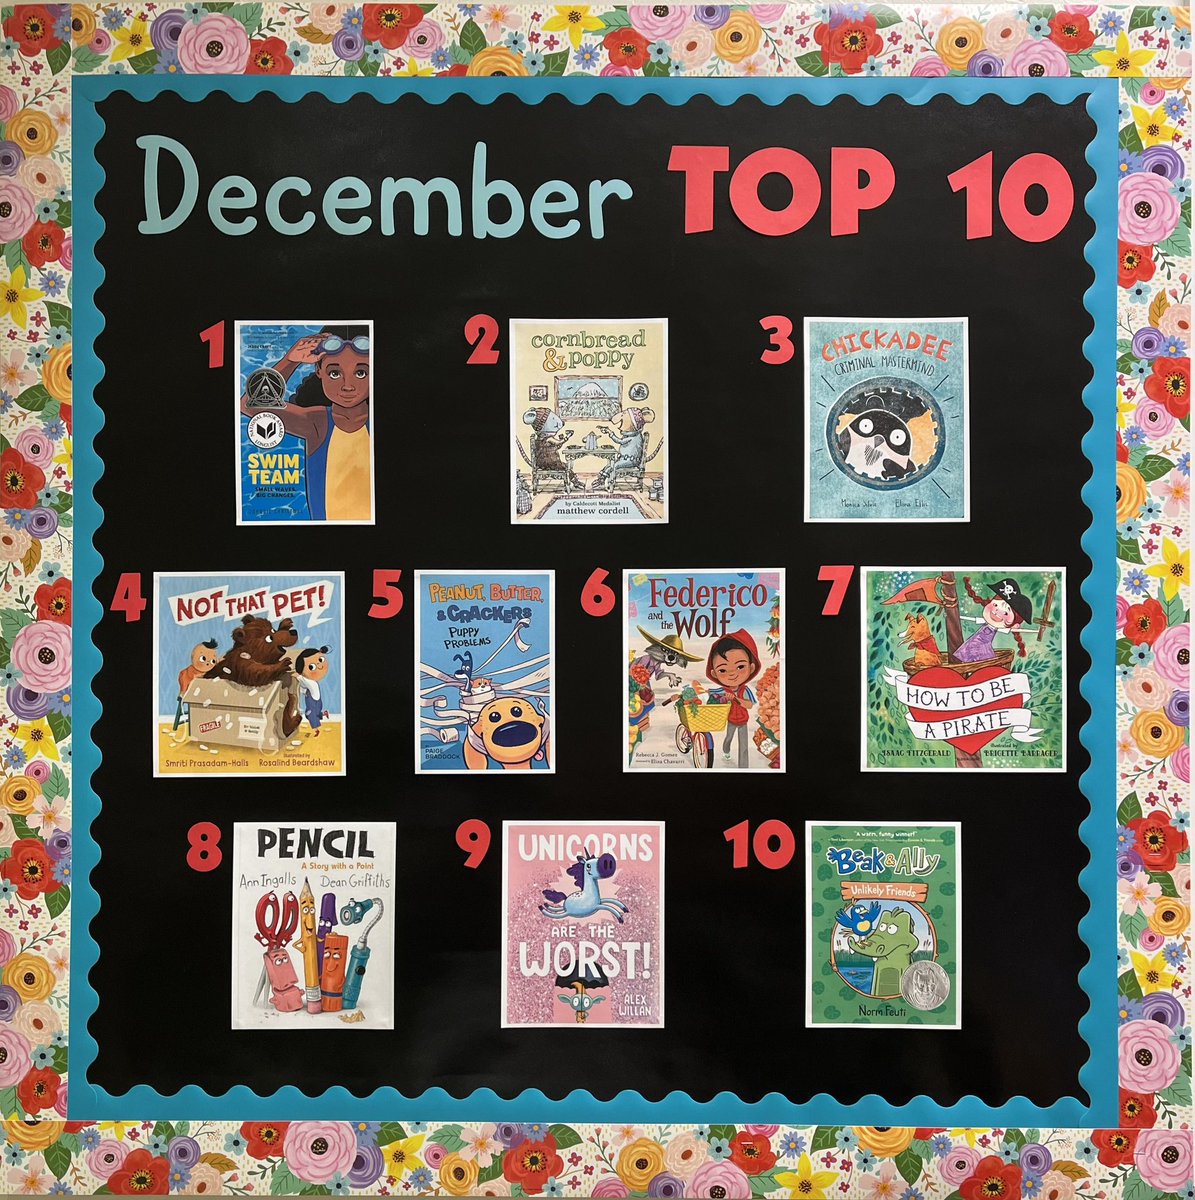 Our December Top 10 is dominated by current and past #SunshineStateYoungReadersAward books! The students can’t get enough! @FloridaMediaEd @FloridaSSYRA @ParksideProud